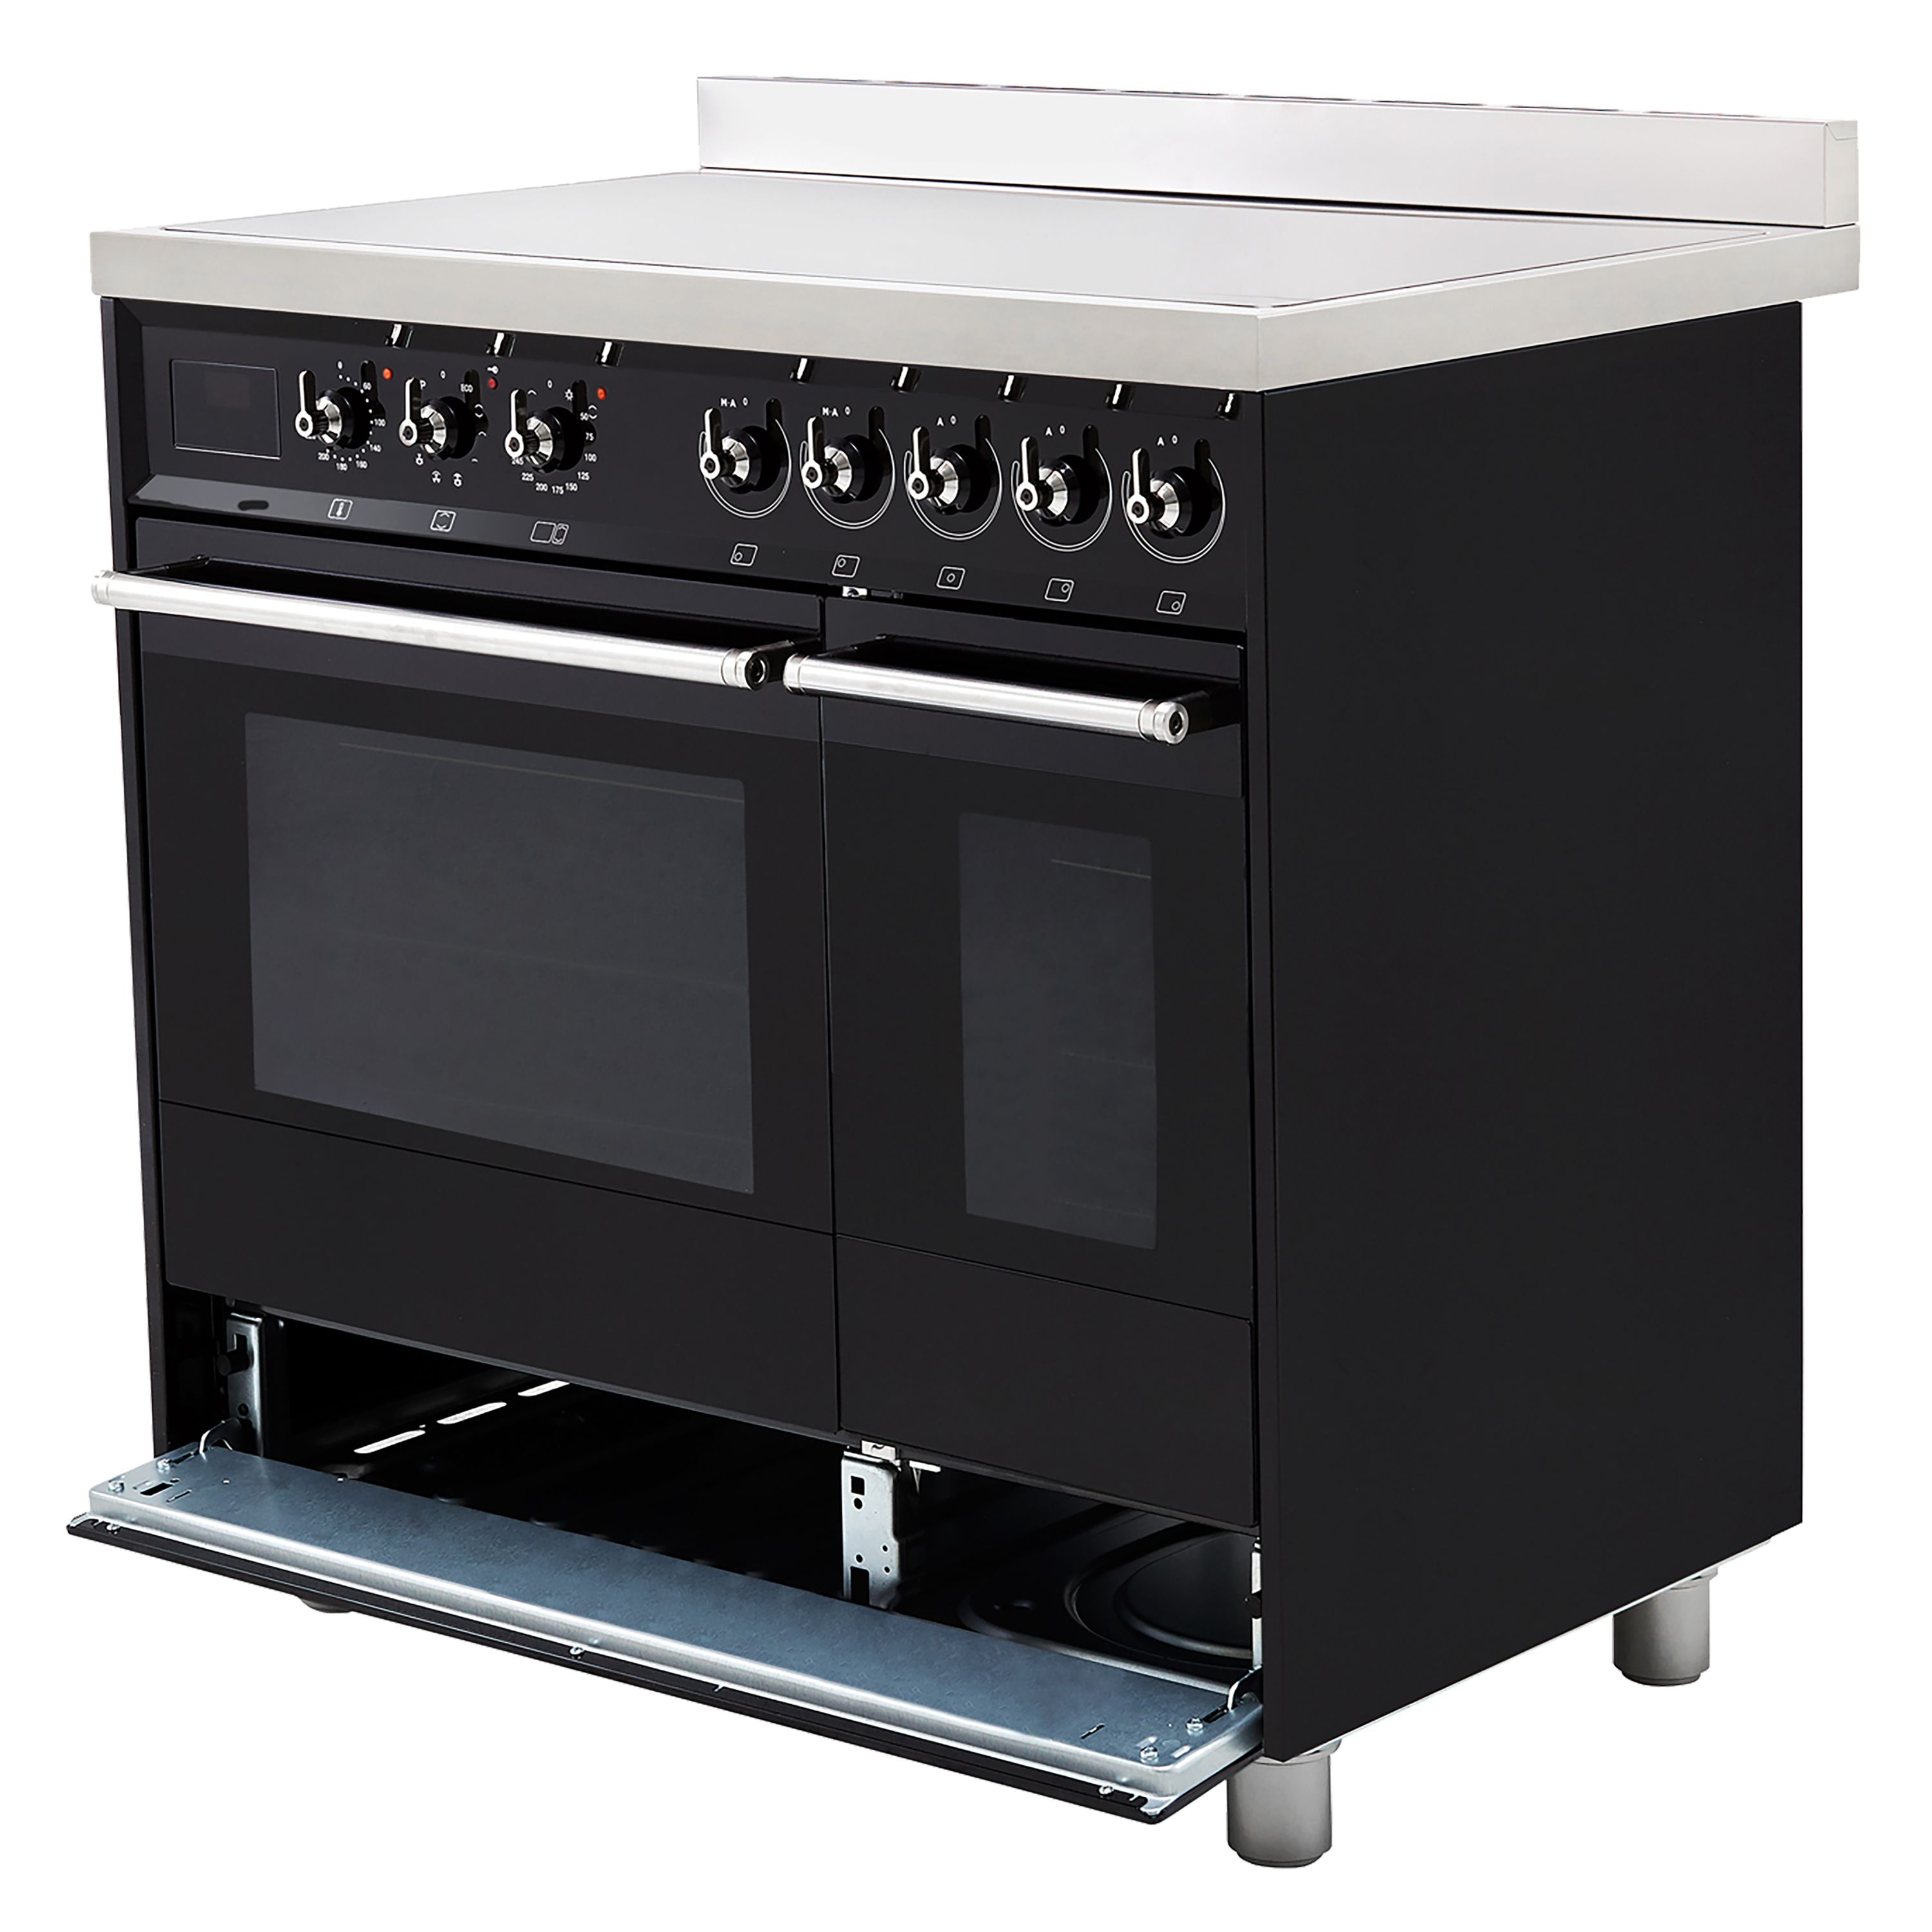 Smeg C92IPBL9-1 Freestanding Electric Range cooker with Induction Hob